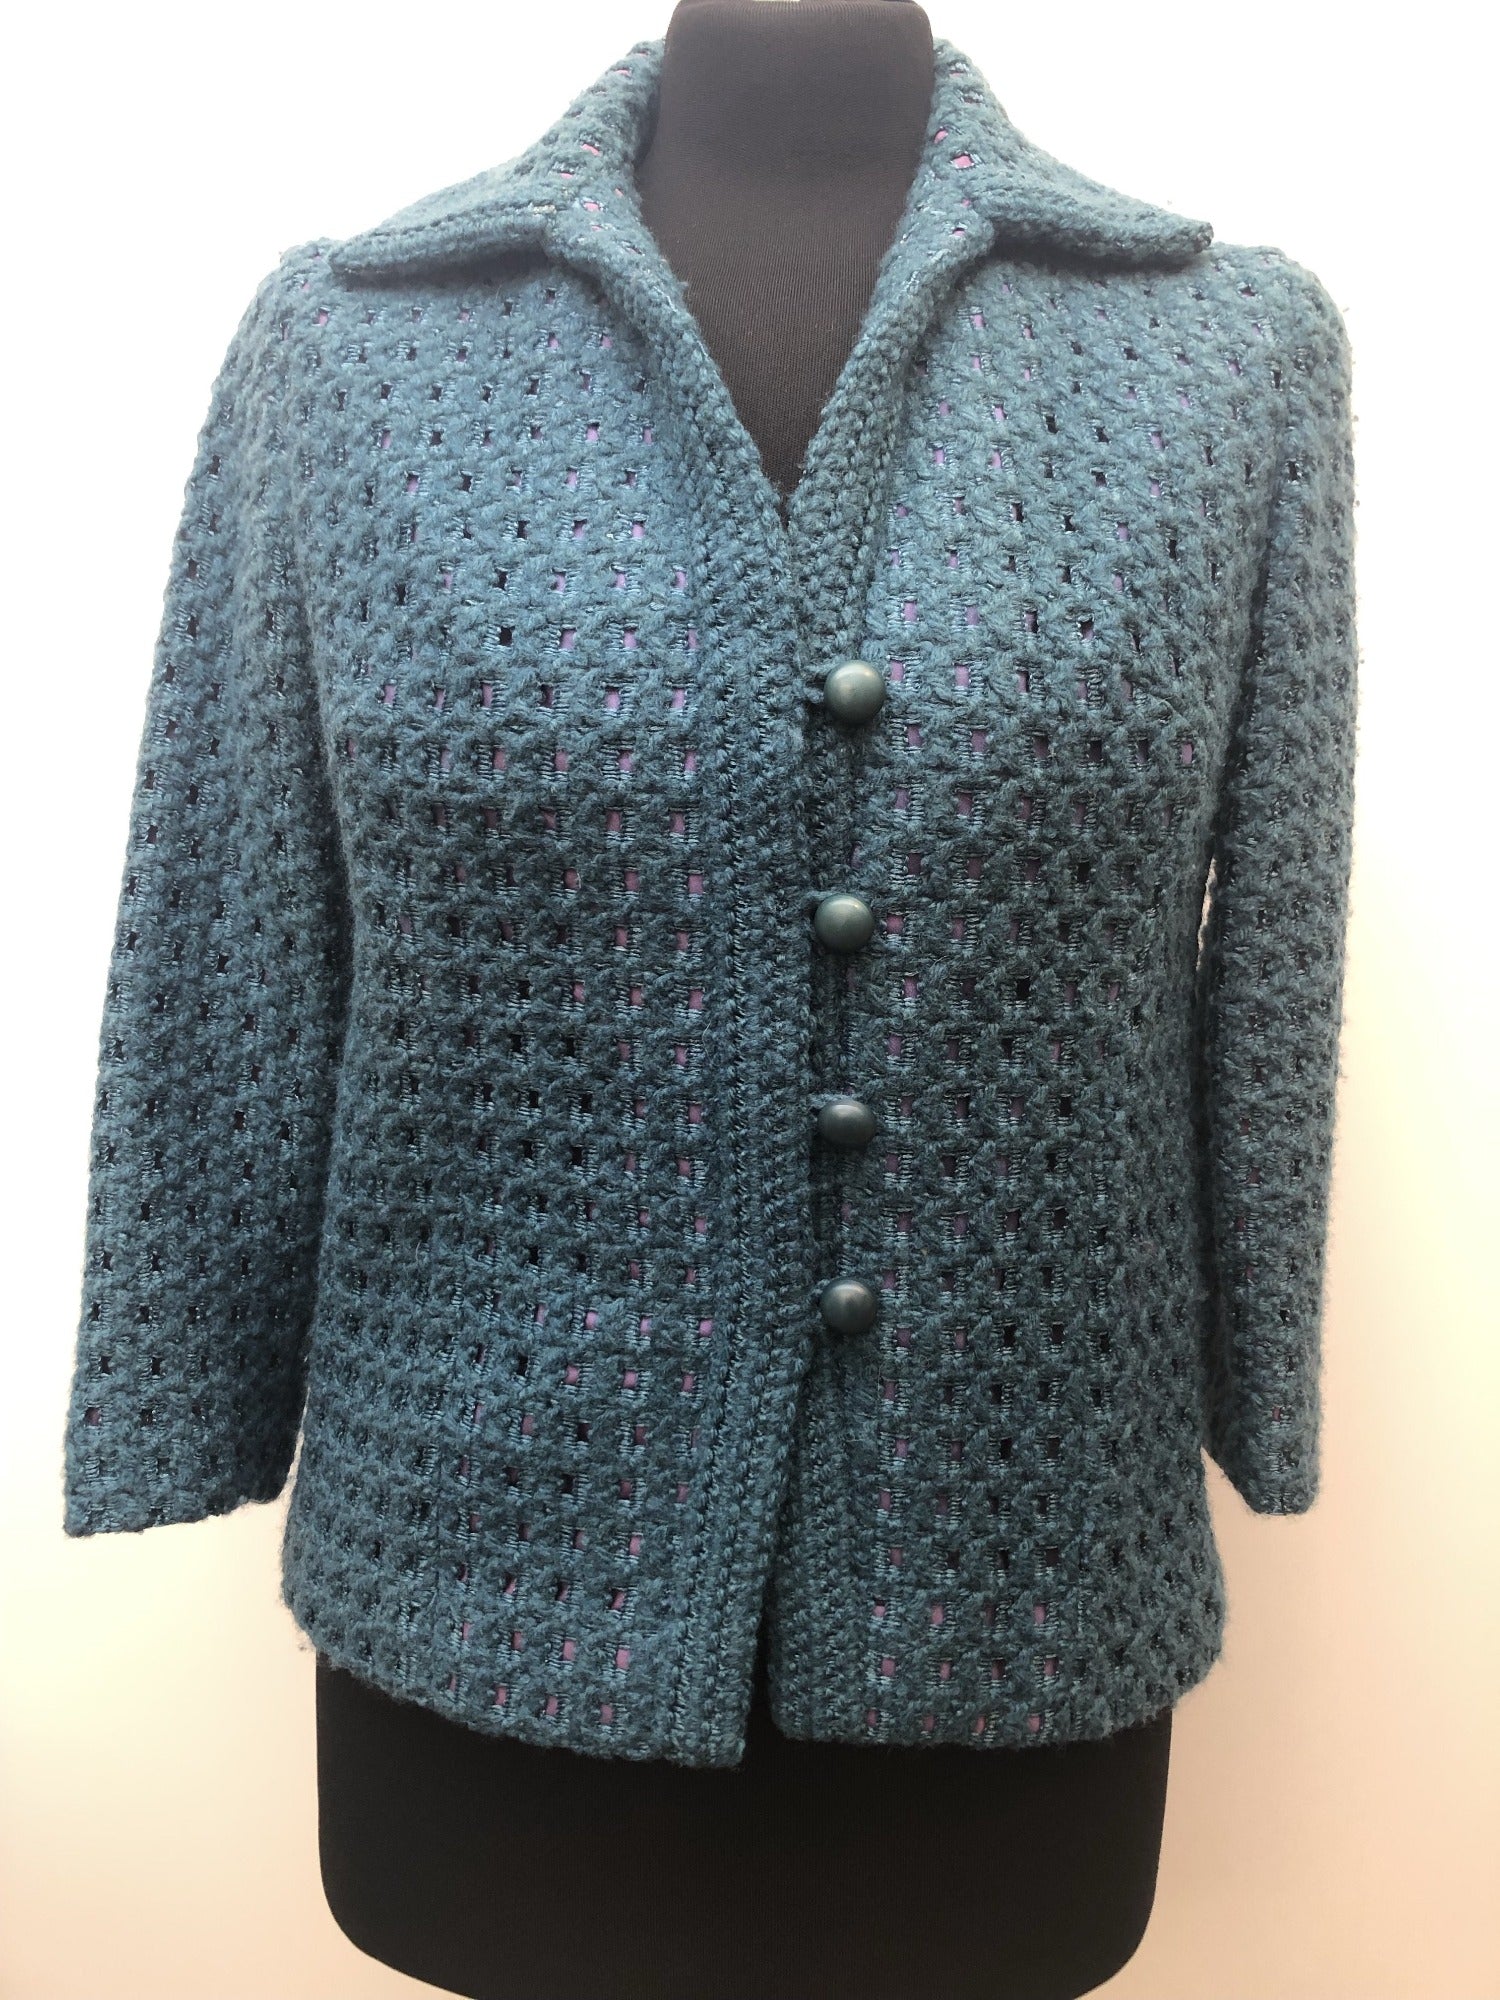 womens  vintage  Urban Village Vintage  urban village  patterned  pattern  Long sleeved top  long sleeve  lined  knitwear  knitted  knit  Jacket  Hardy Amies Boutique  collar  button down  blue  60s  1960s  10